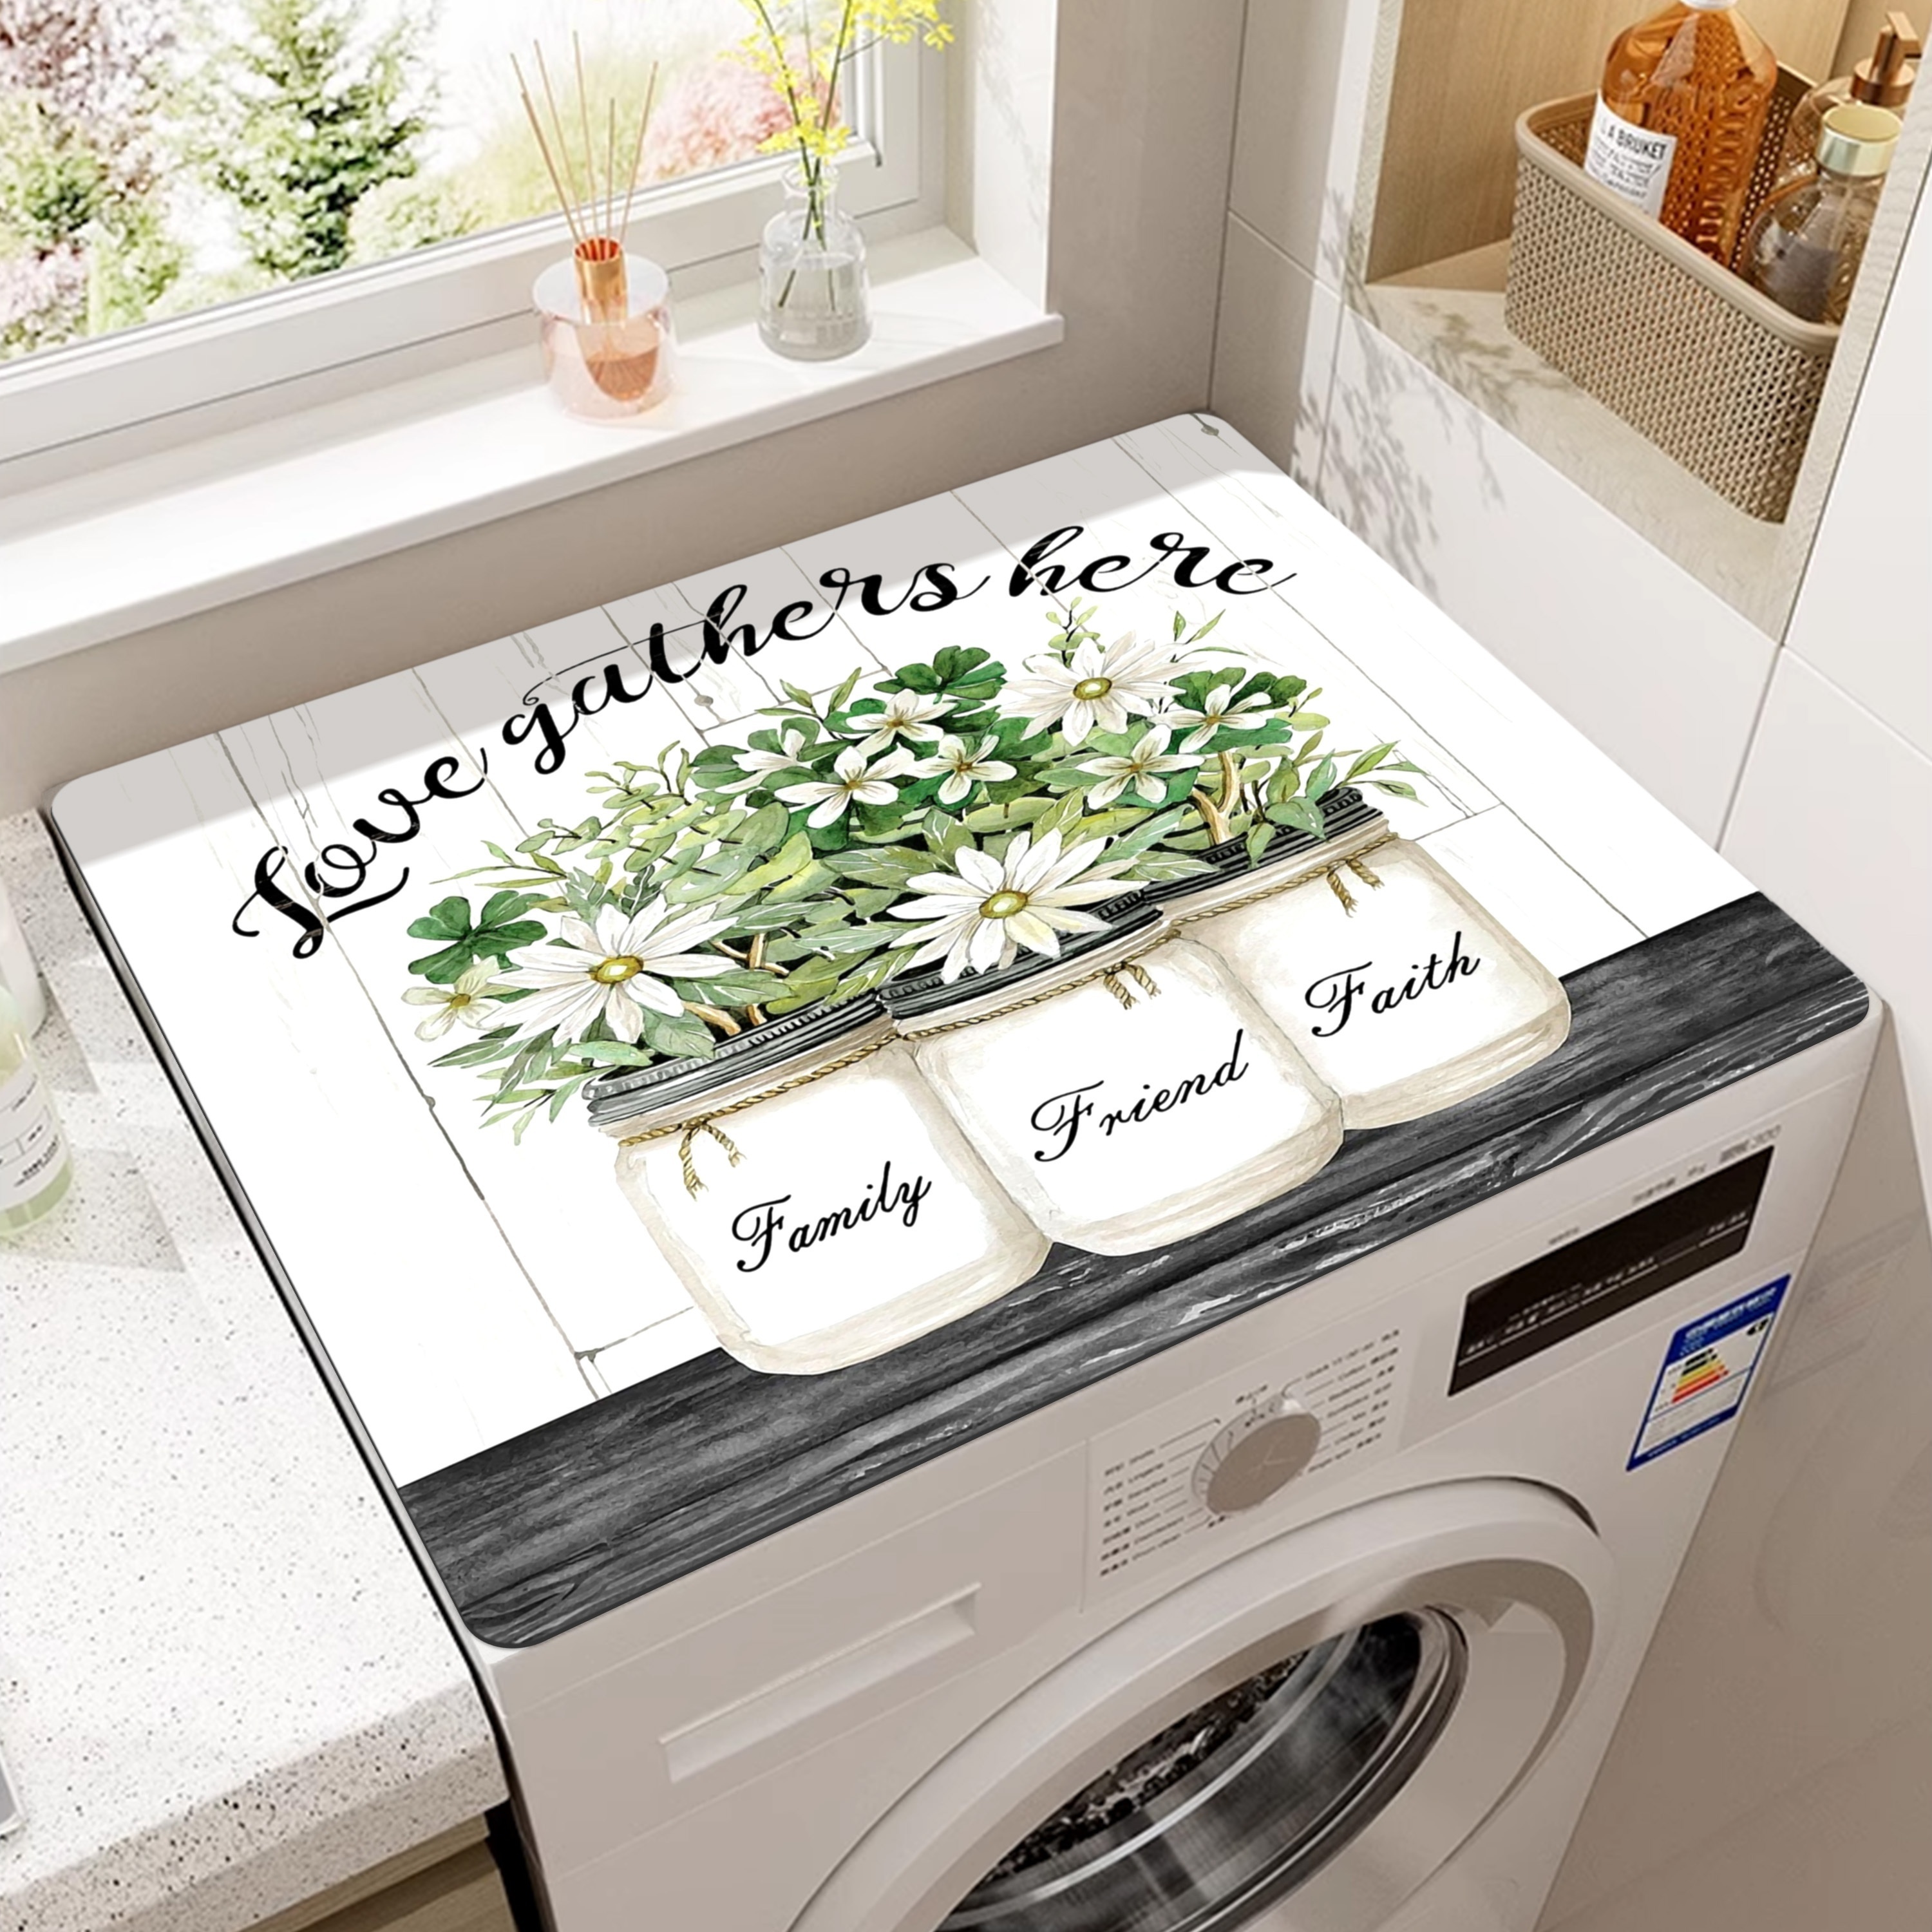 Laundry Loads Of Fun Machine Cover Dryer Top Covers Anti-Slip Fridge Dust  Cover, Roller Washing Machine Top Cover Load